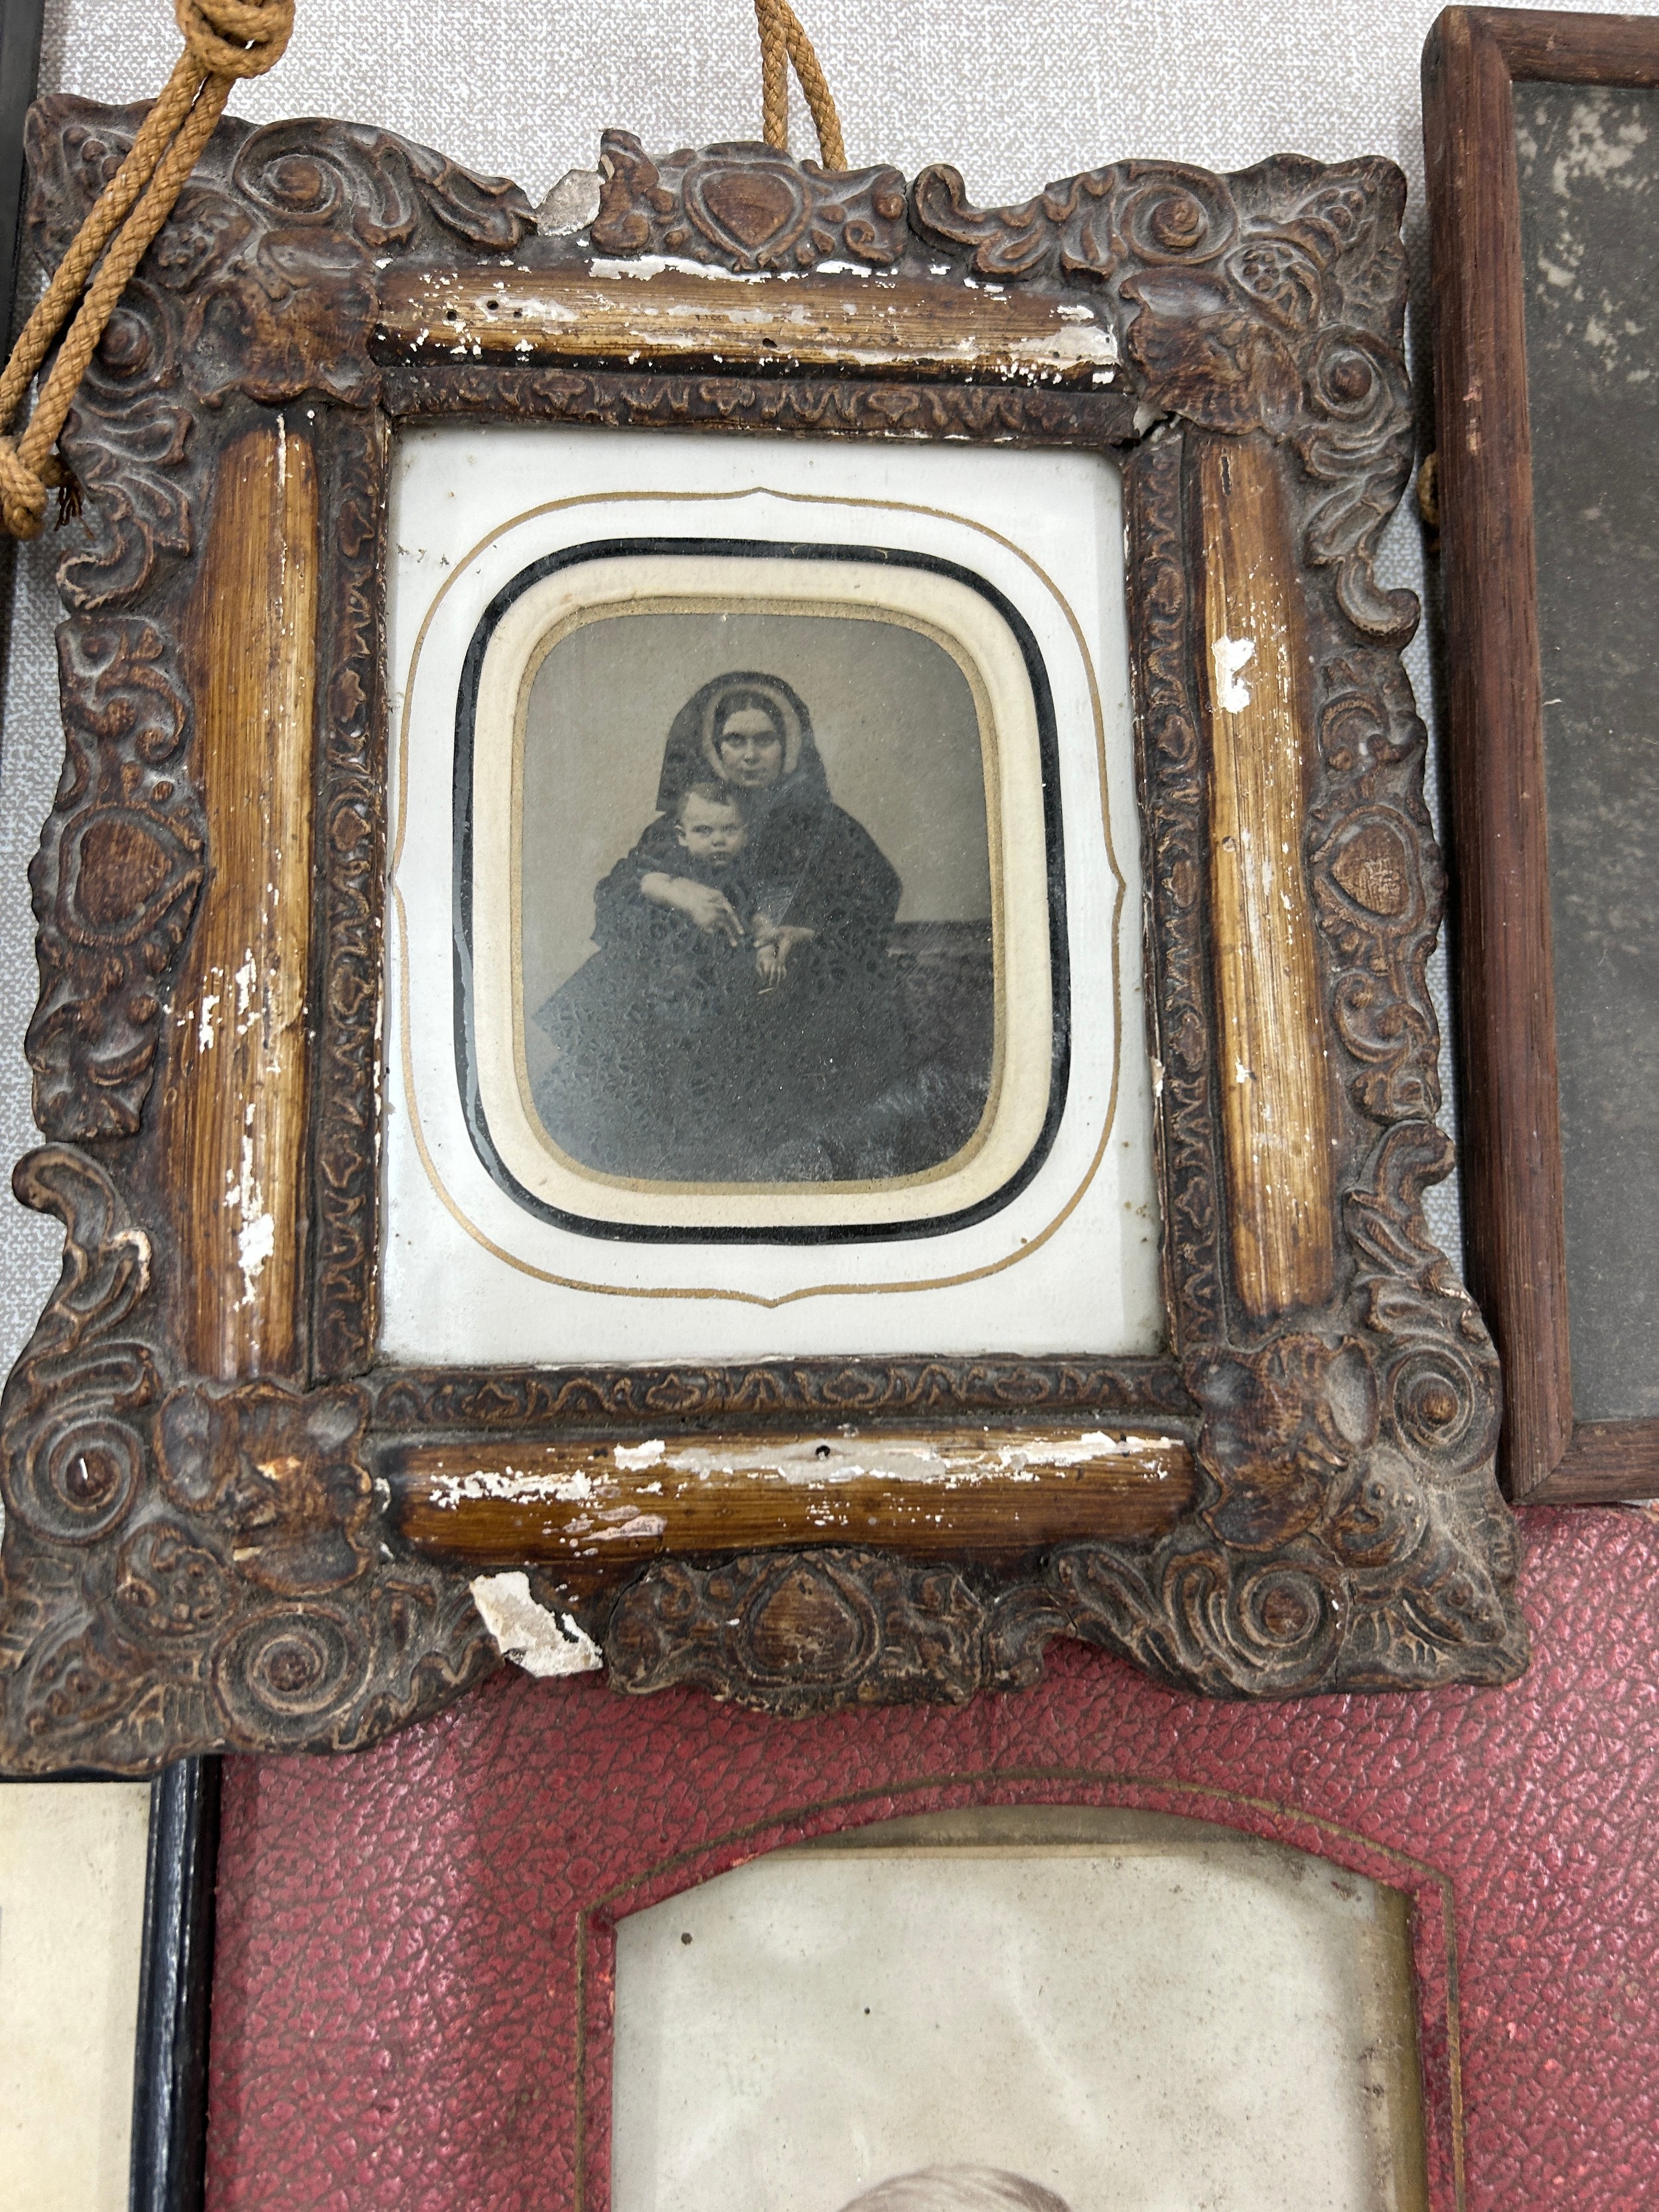 Large selection of framed antique photos largest measures approximately 16 inches by 16 inches - Image 6 of 10